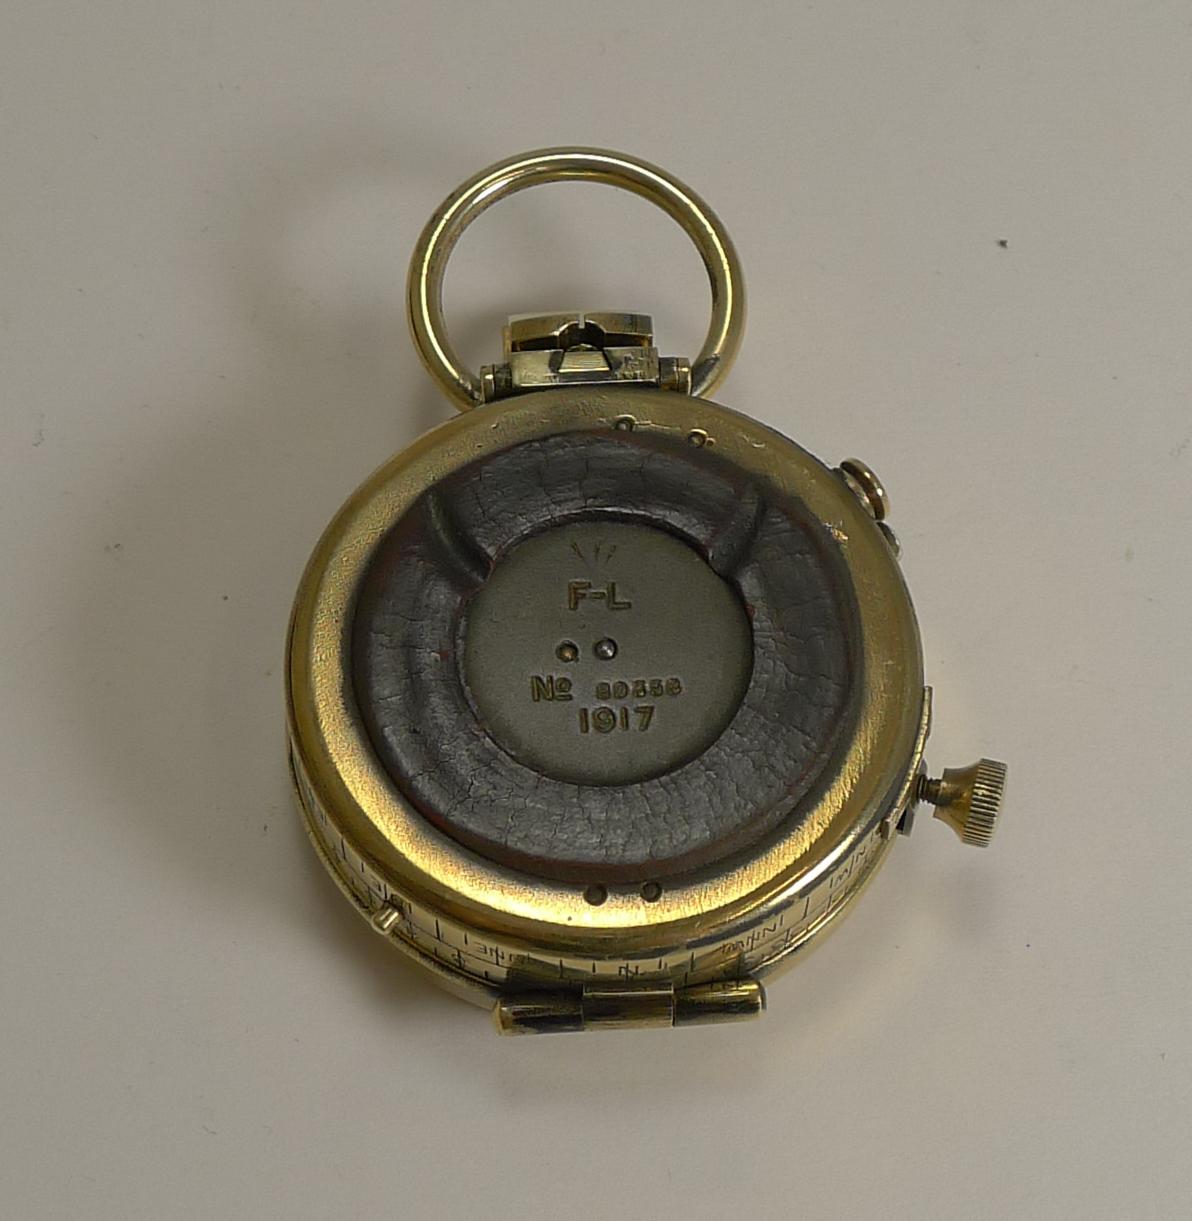 WW1 1917 British Army Officer's Compass Verner's Patent MK VIII by French Ltd 1